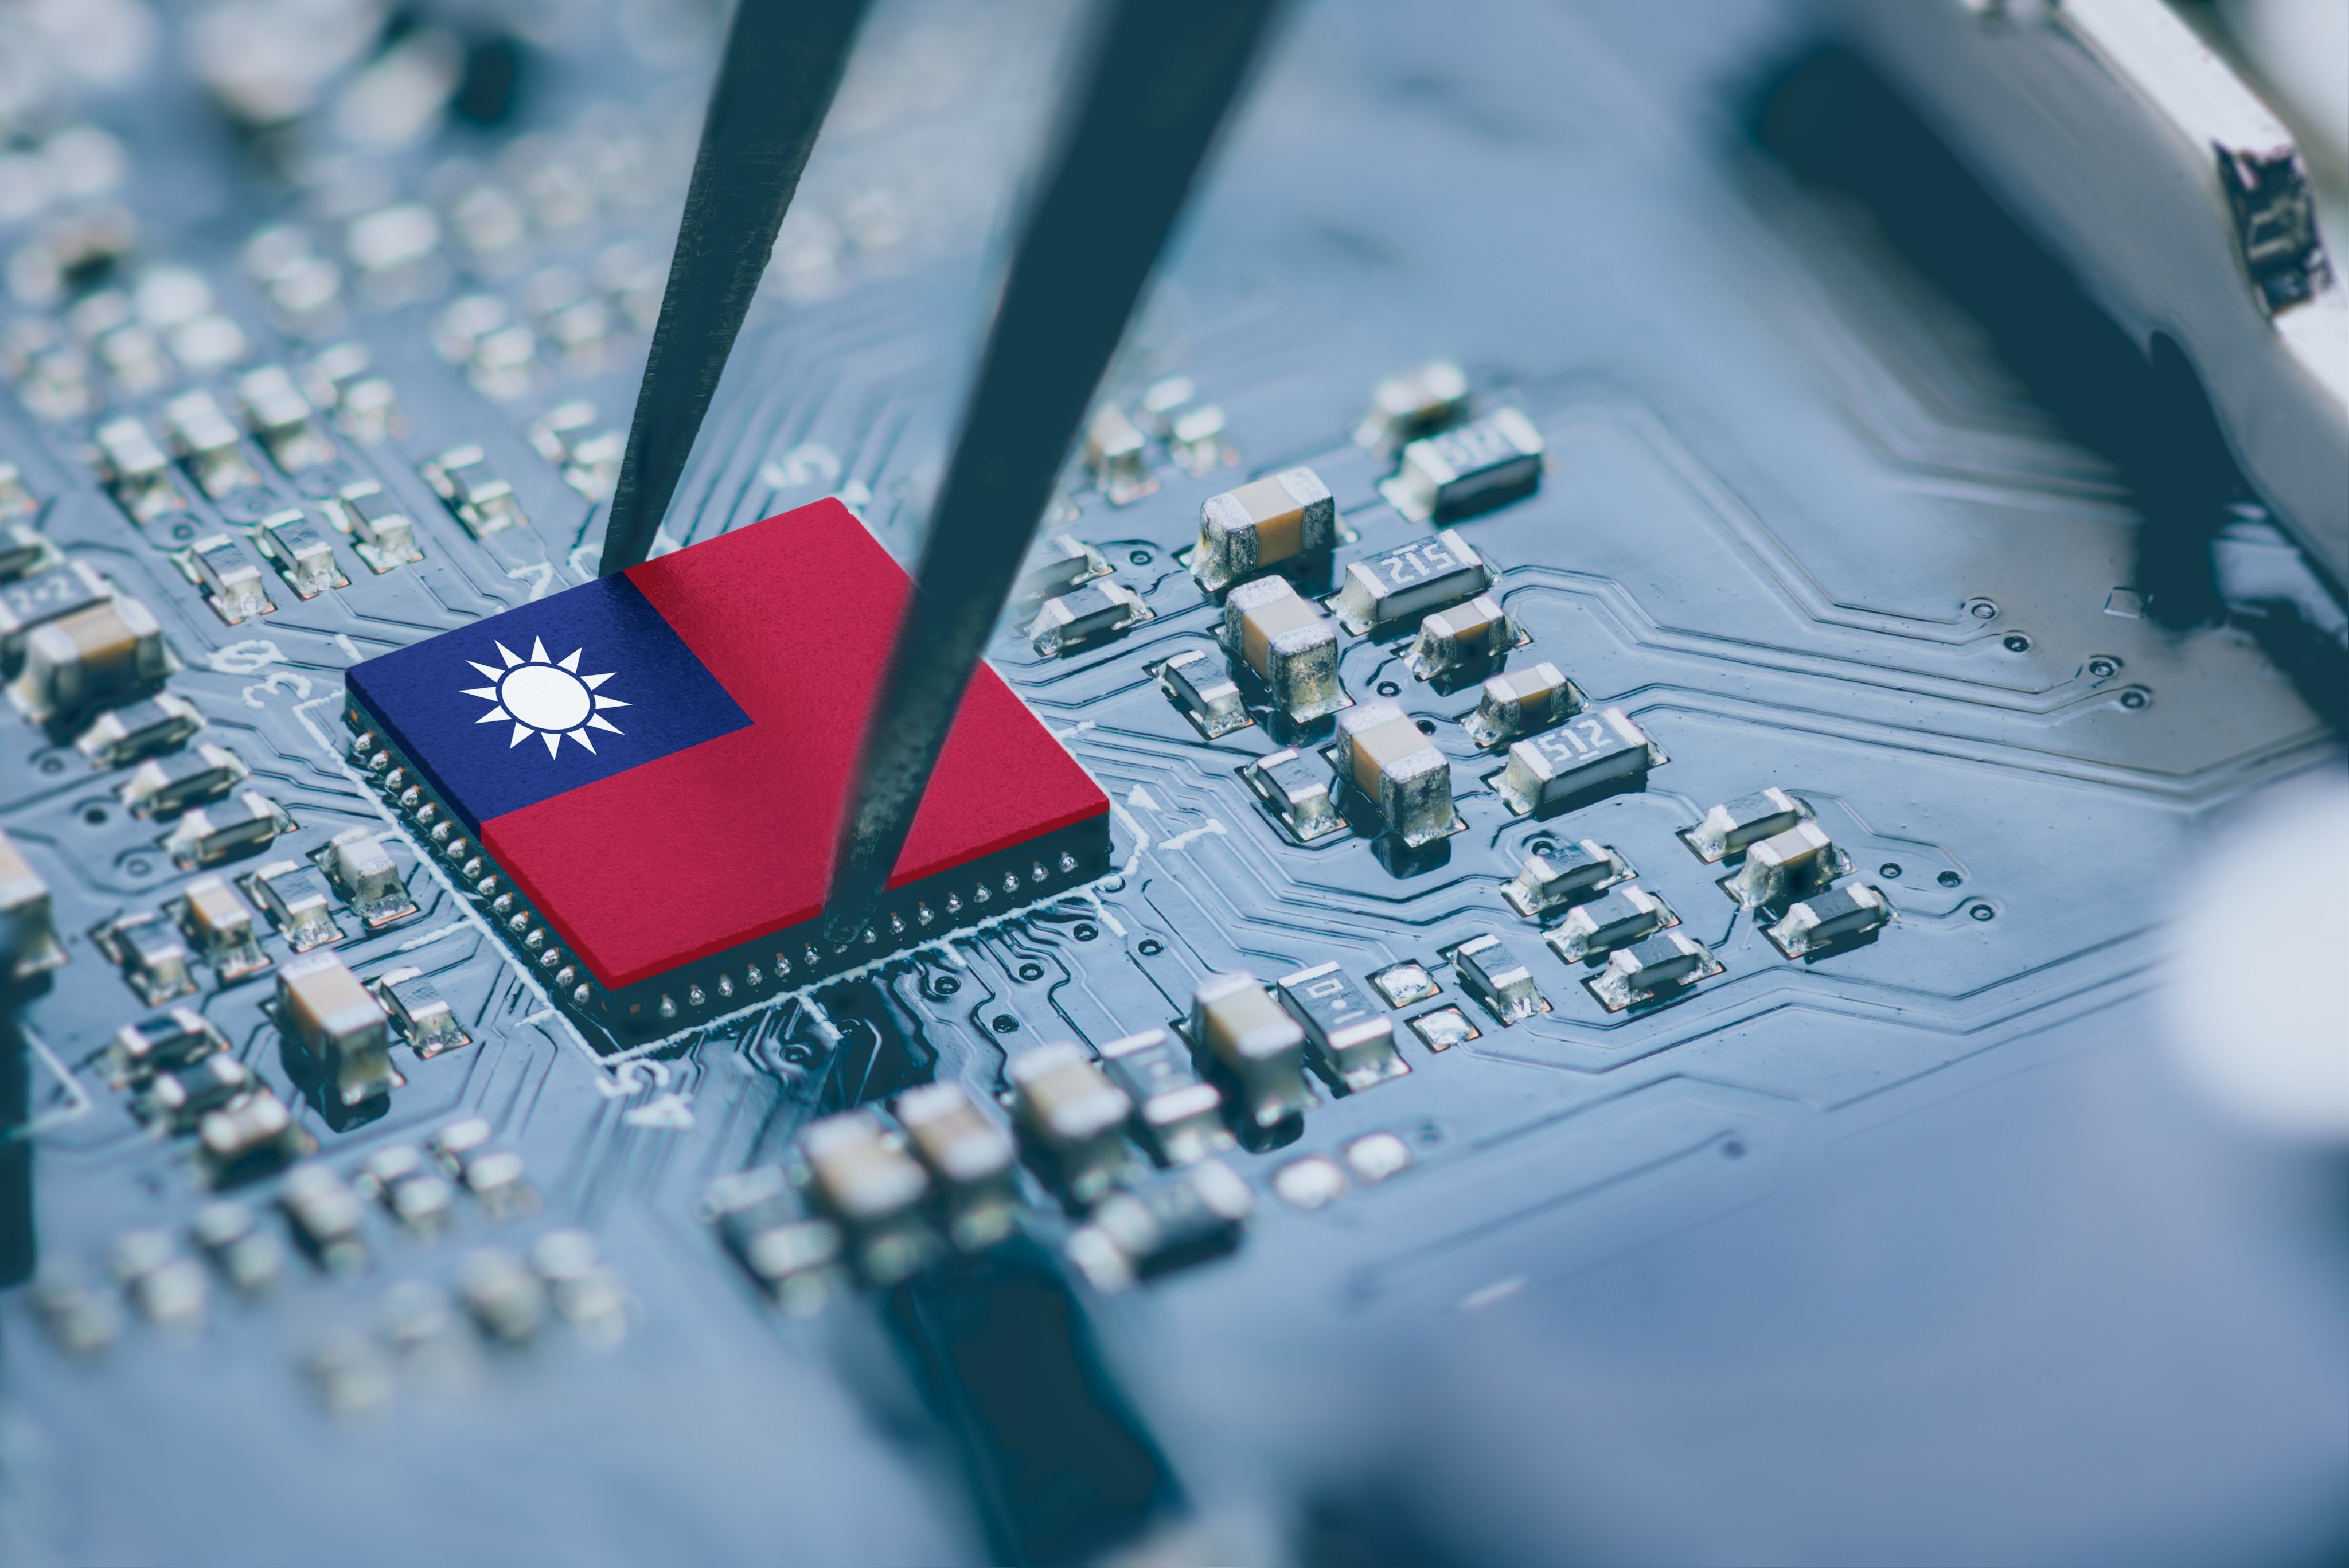 Taiwan’s industrial output index lost 4.8 per cent last month compared to a year earlier following 31 months of year-on-year growth. Photo: Shutterstock